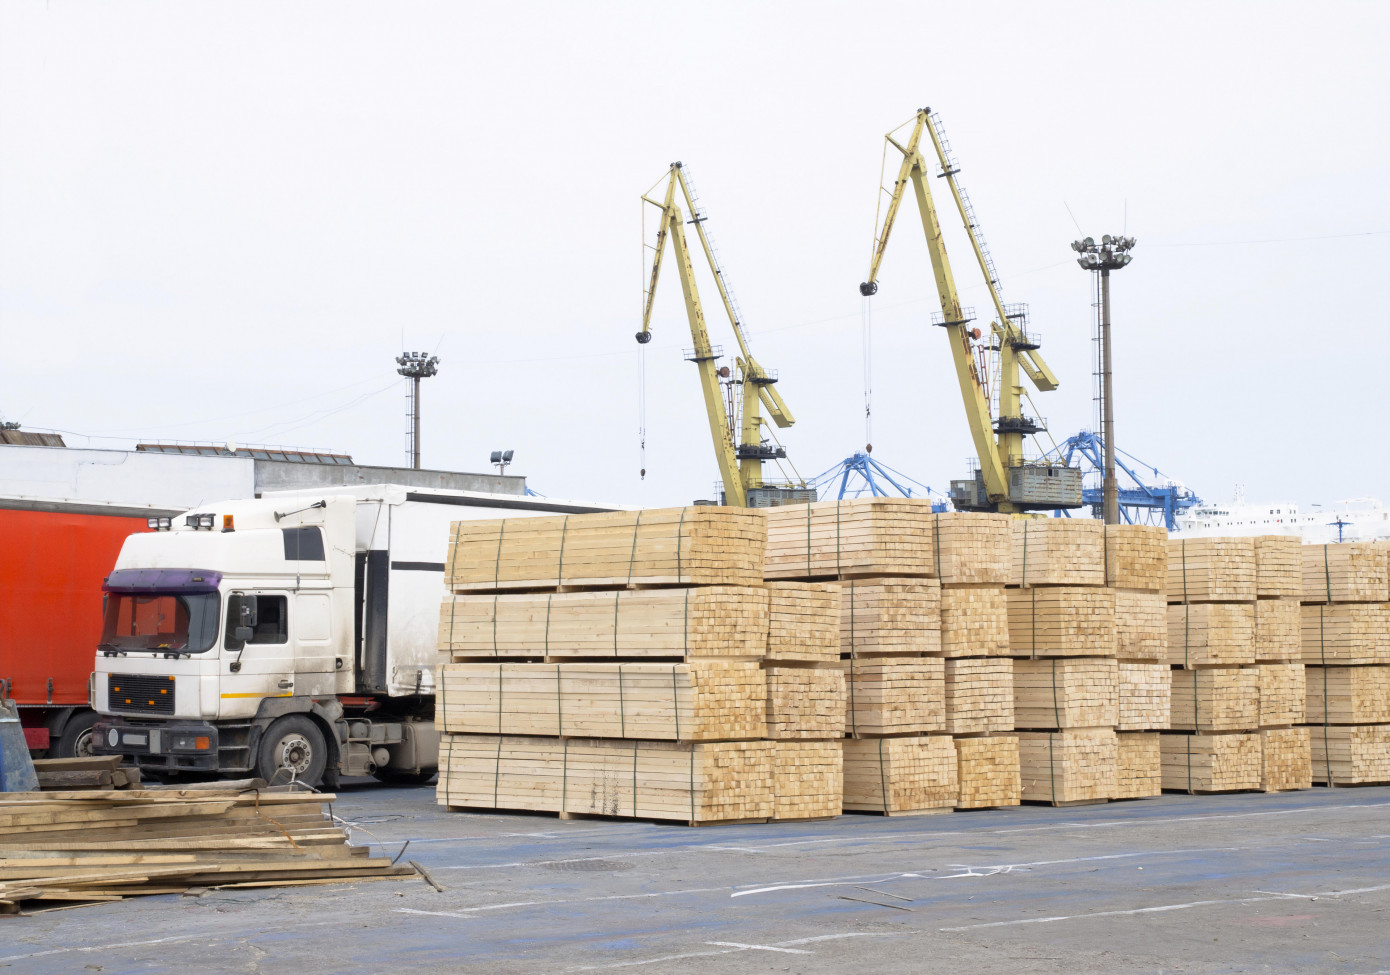 Exports of lumber from Germany to U.S. decrease 41% in January